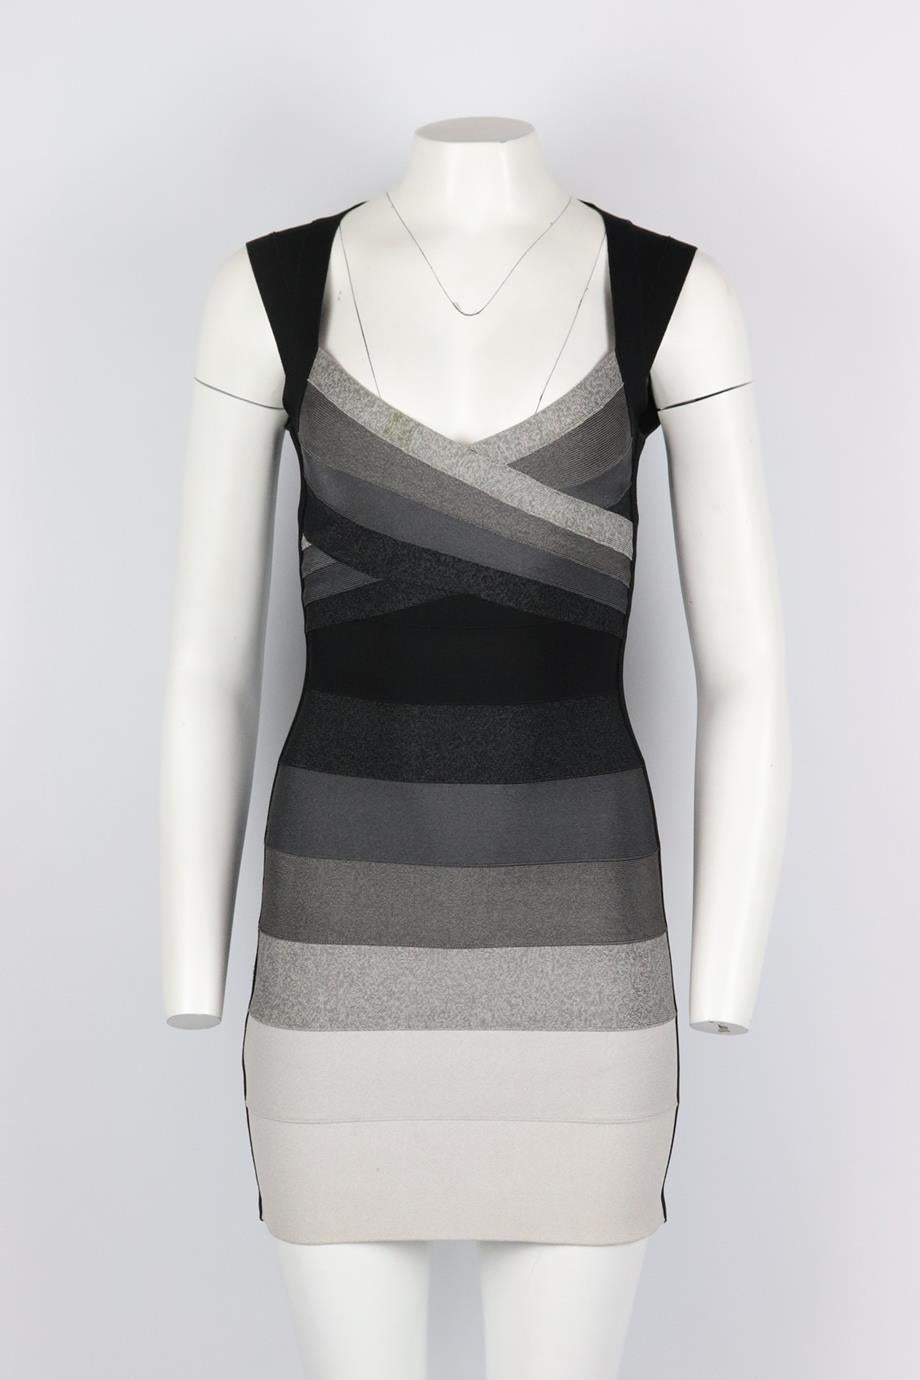 Herve Leger ombré bandage mini dress. Black and grey. Sleeveless, v-neck. Zip fastening at back. 90% Nylon, 9% nylon, 1% spandex. Size: Small (UK 8, US 4, FR 36, IT 40). Bust: 30 in. Waist: 25 in. Hips: 31.2 in. Length: 32.1 in. Good condition -